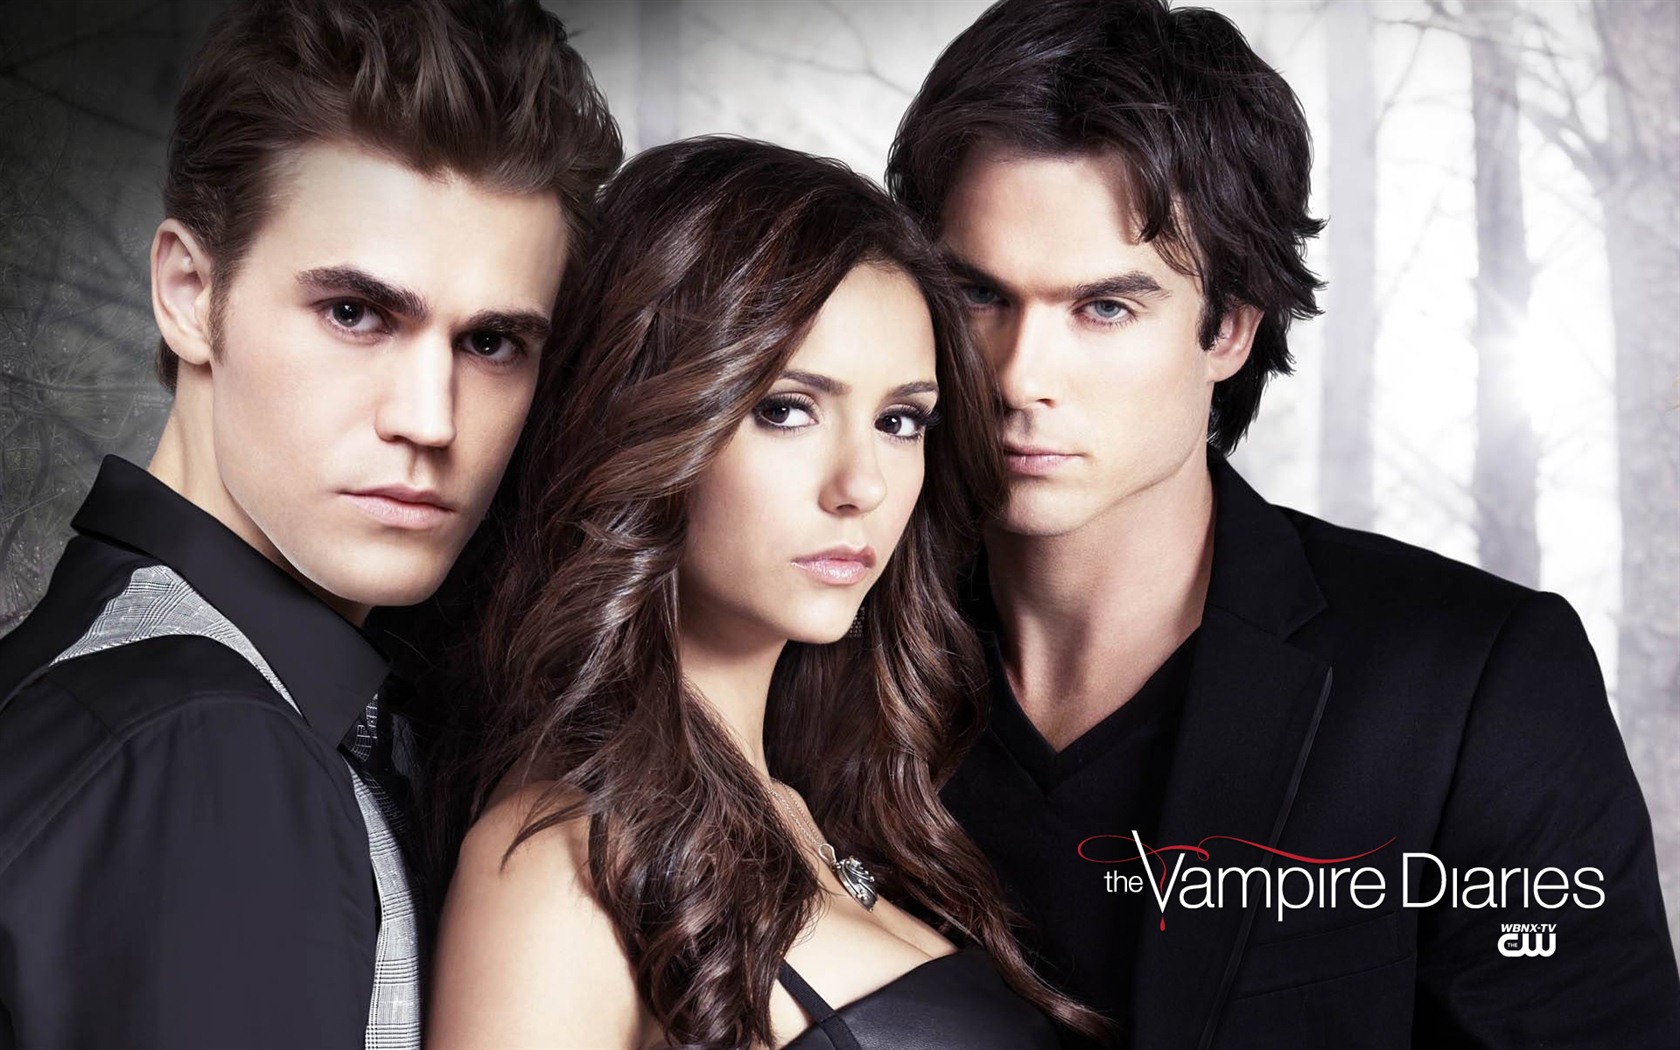 The Vampire Diaries HD Wallpapers #1 - 1680x1050